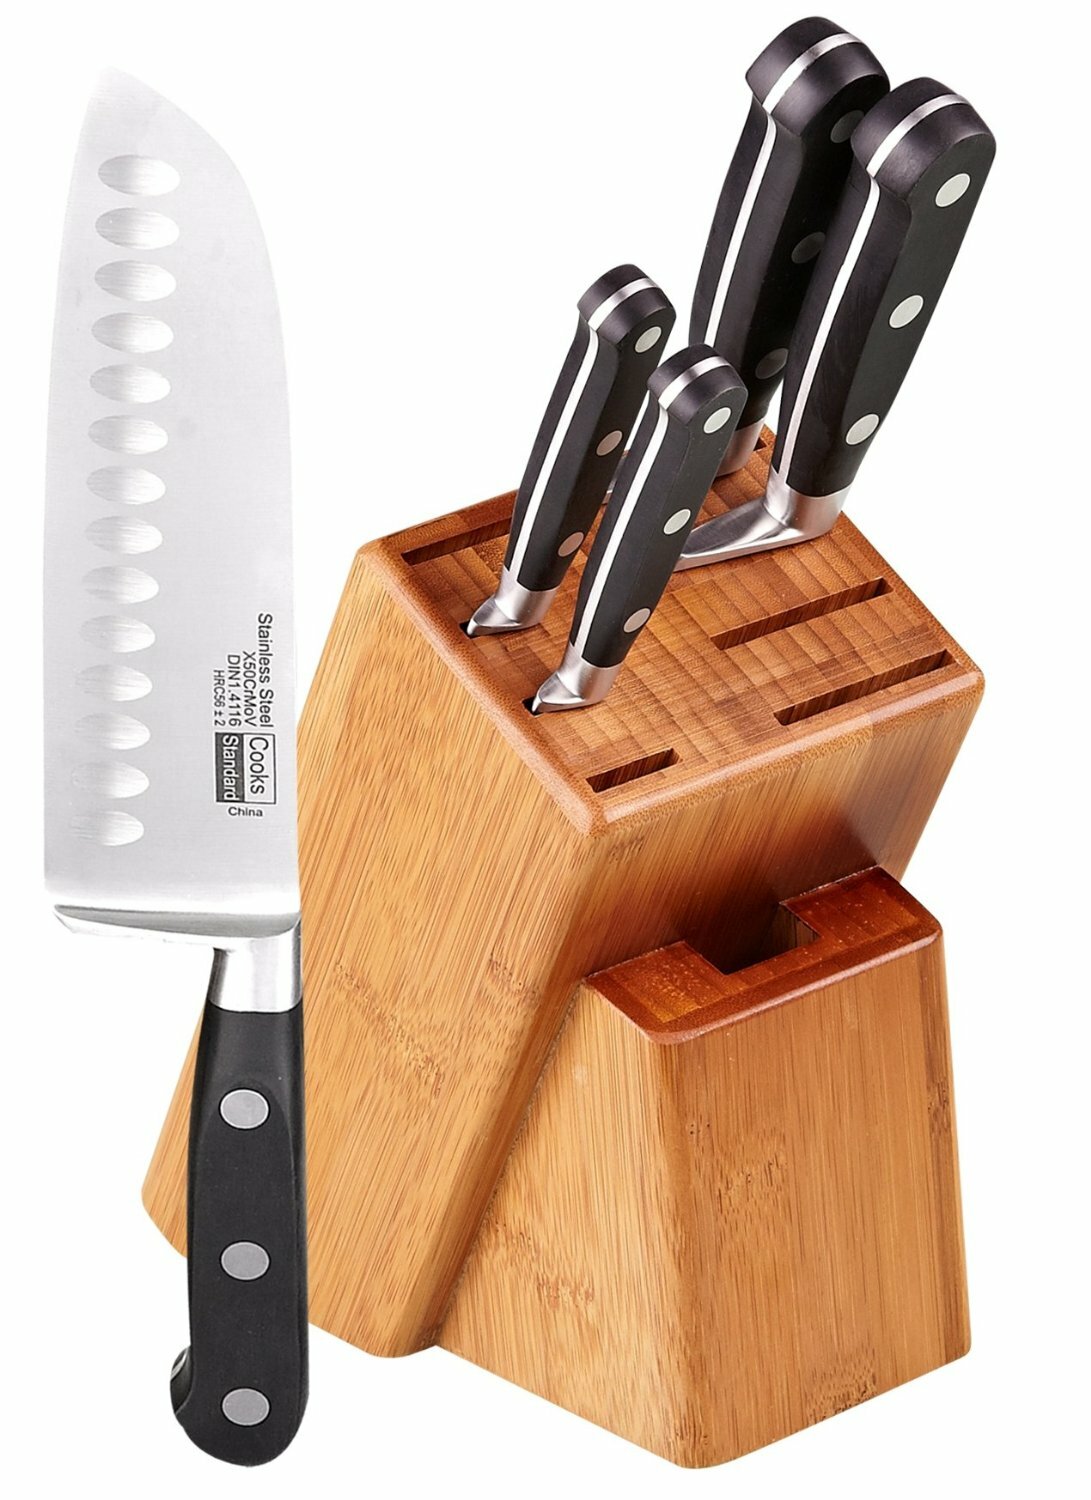 Cooks Standard 6-Piece Stainless Steel Knife Set with Expandable Bamboo  Block for Extra Slots